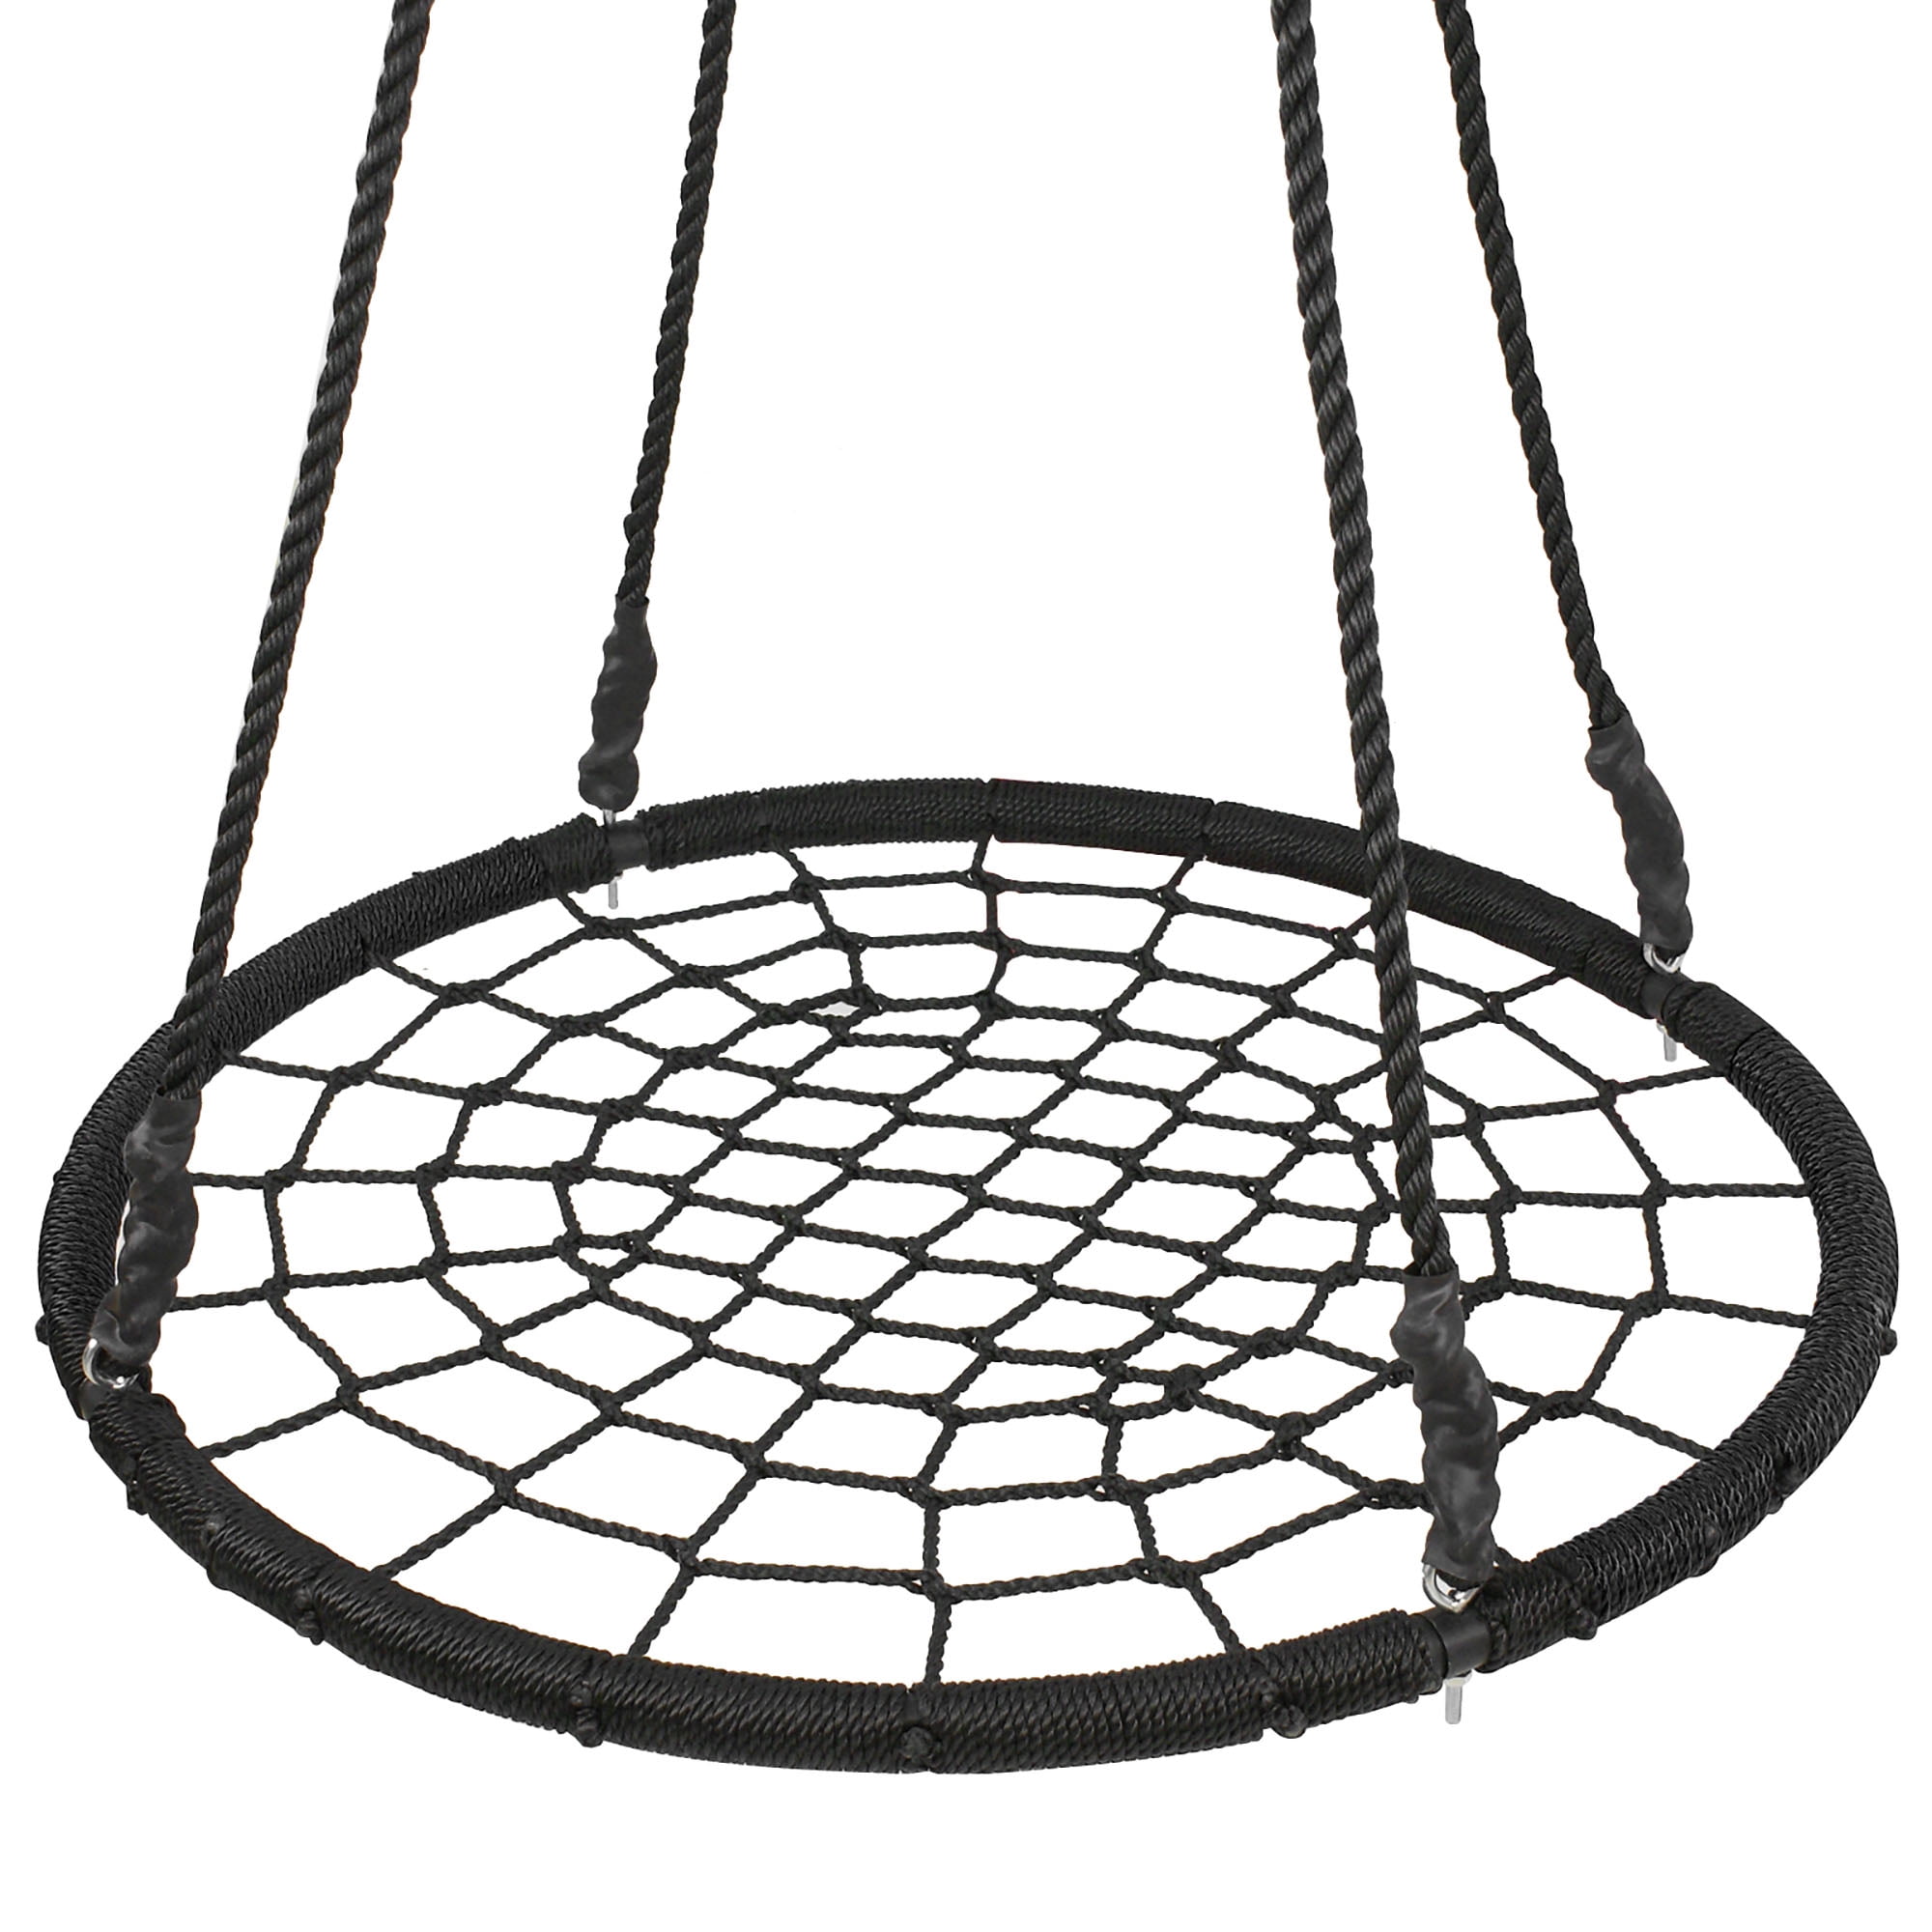 SUPER DEAL Largest 48 Spider Web Swing Set for Tree 700lbs Extra Large  Platform Net Swing 71inch Adjustable Hanging Ropes - Attaches to Trees or